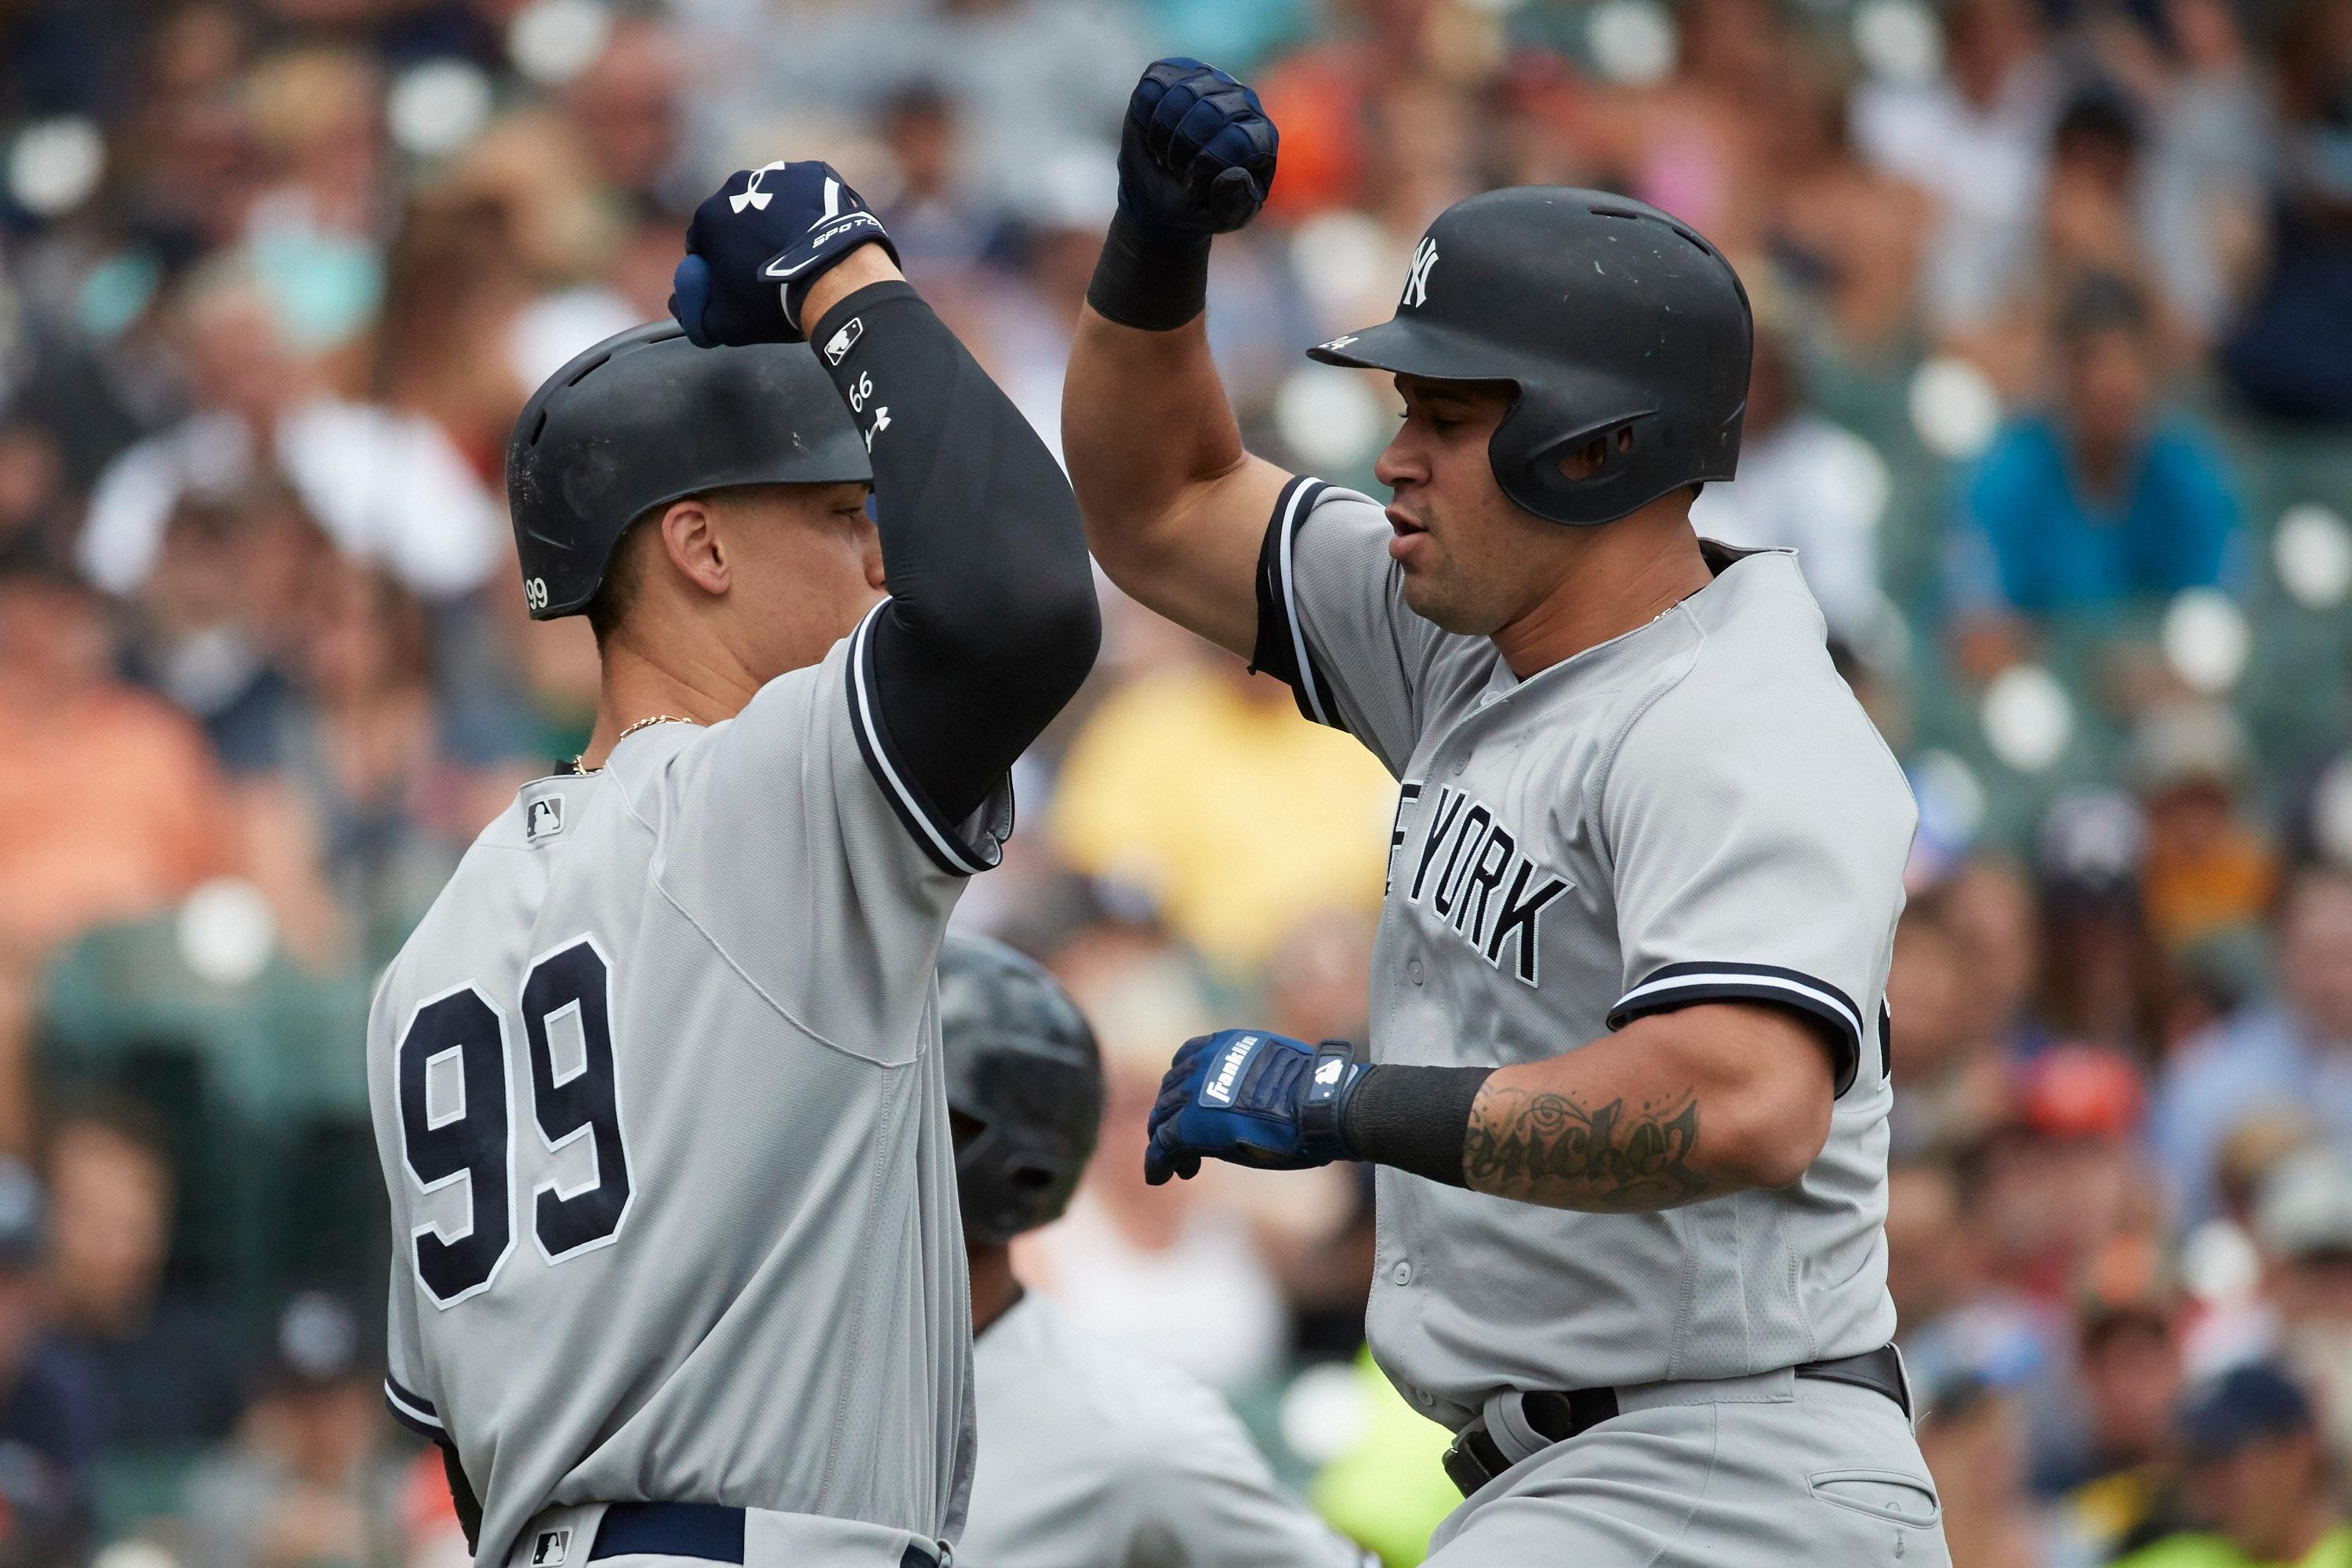 Aug 24, 2017; Detroit, MI, USA; New York Yankees designated hitter Gary Sanchez (24) receives congratulations from right fielder Aaron Judge (99) after he hit a home run in the fourth inning against the Detroit Tigers at Comerica Park. Mandatory Credit: Rick Osentoski-USA TODAY Sports / Rick Osentoski-USA TODAY Sports